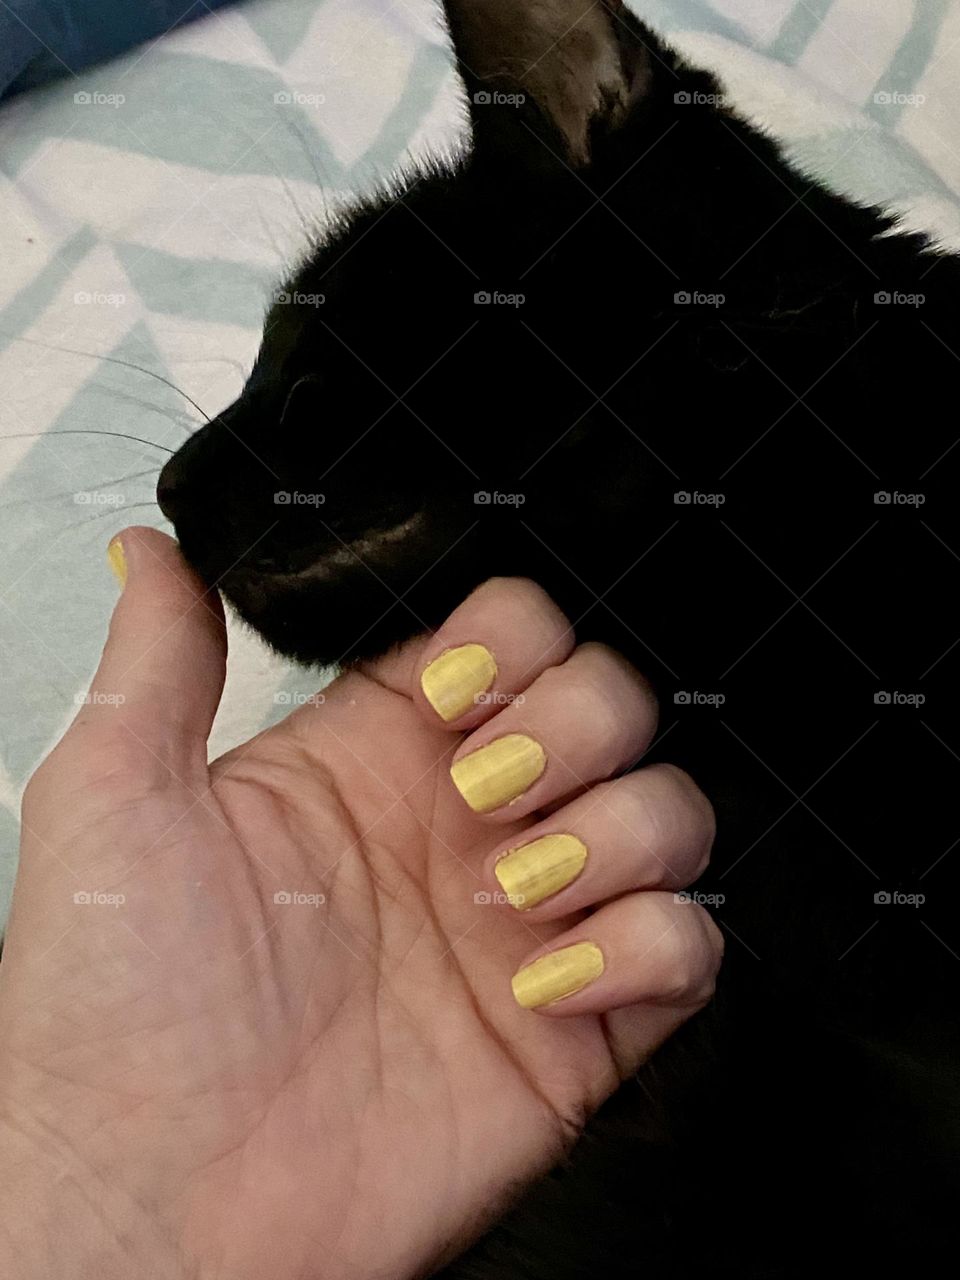 A black cat sniffing the hand of a person wearing yellow nail polish